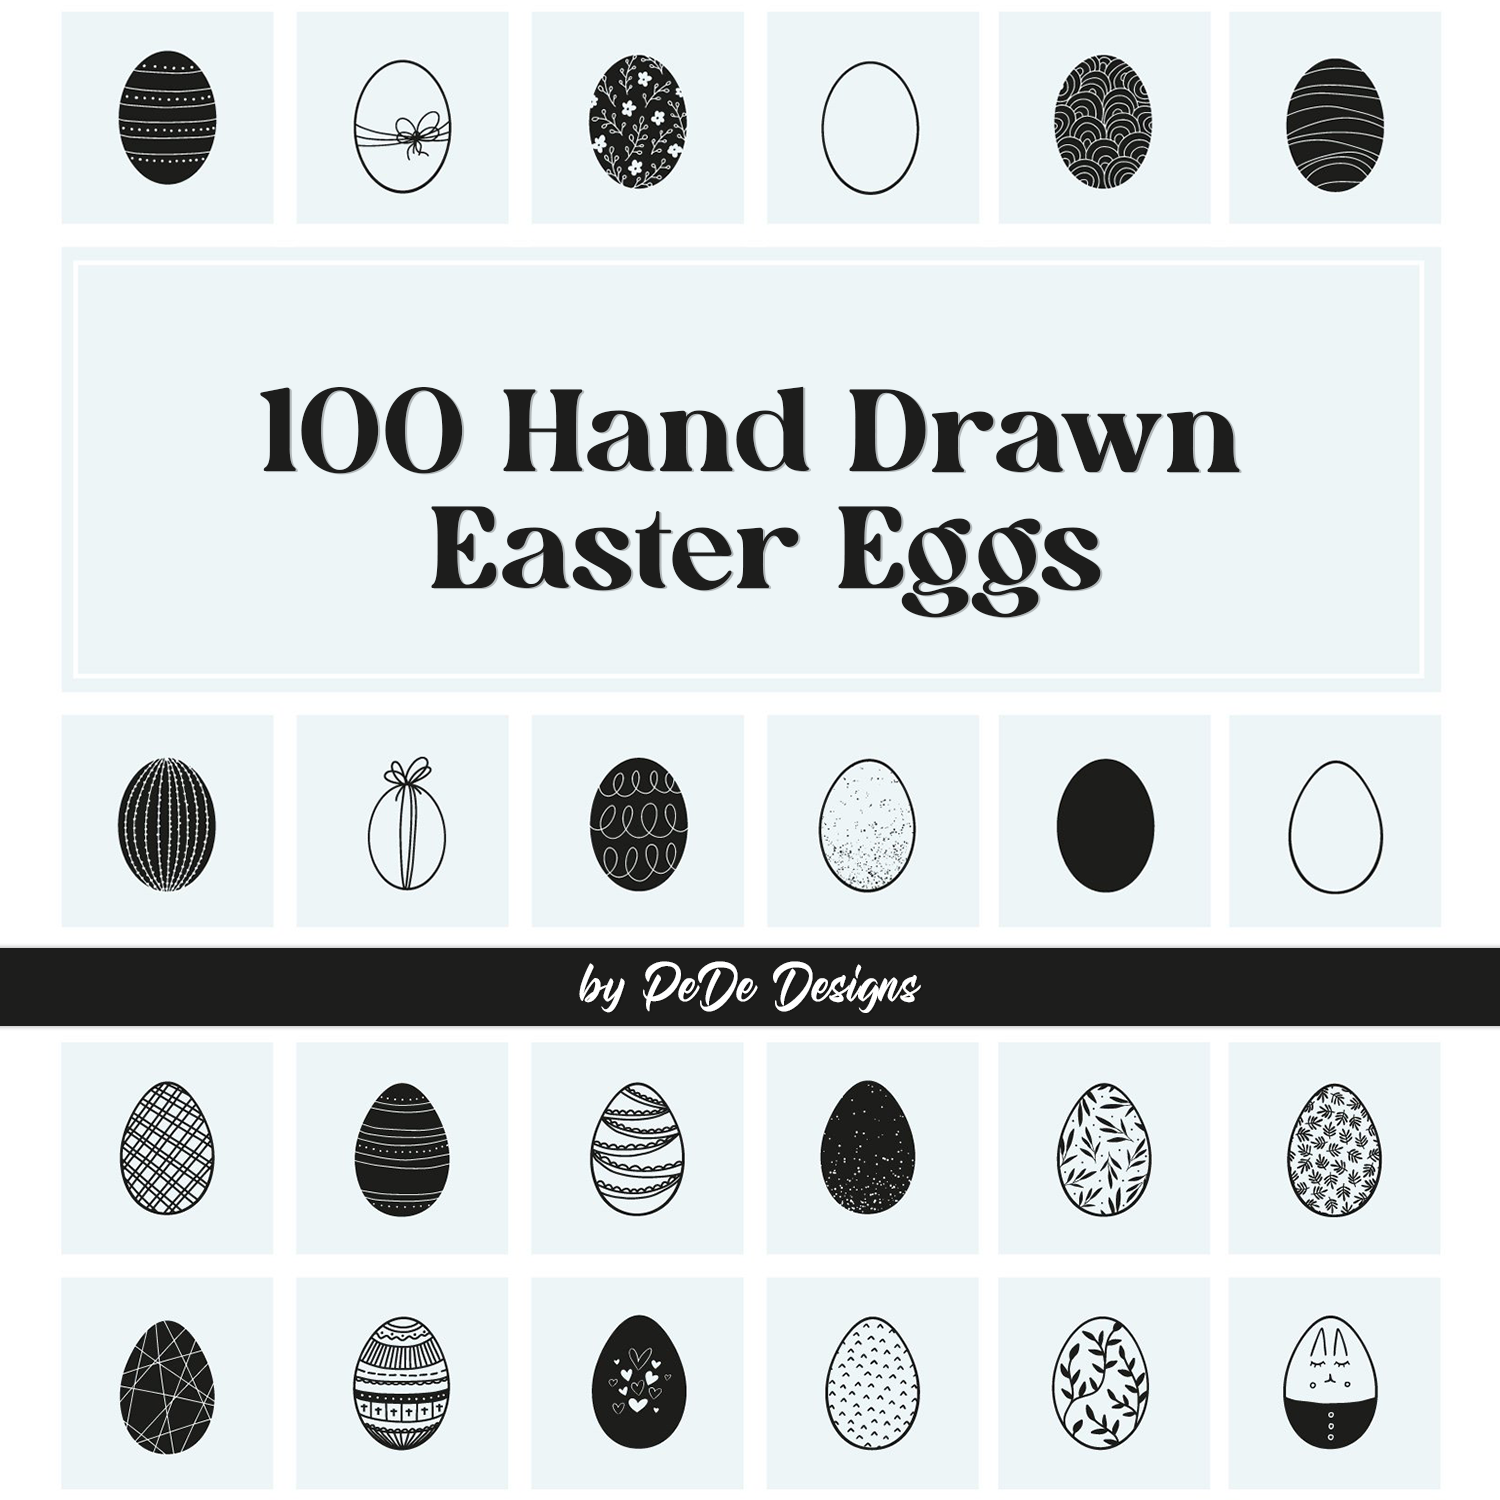 100 Hand Drawn Easter Eggs.